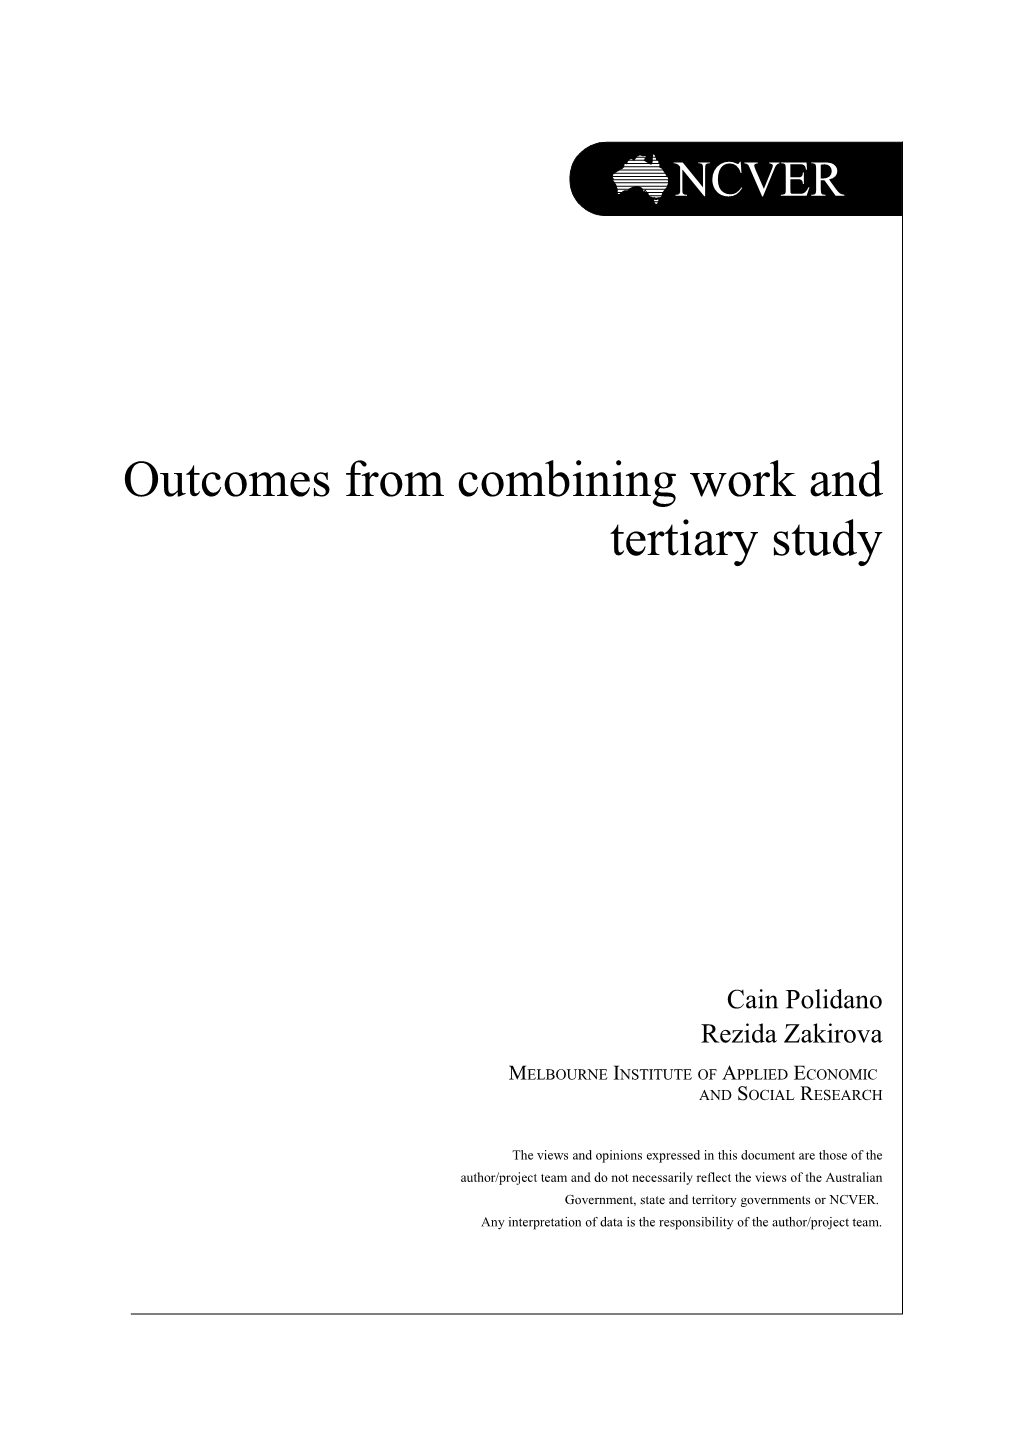 Outcomes from Combining Workand Tertiary Study